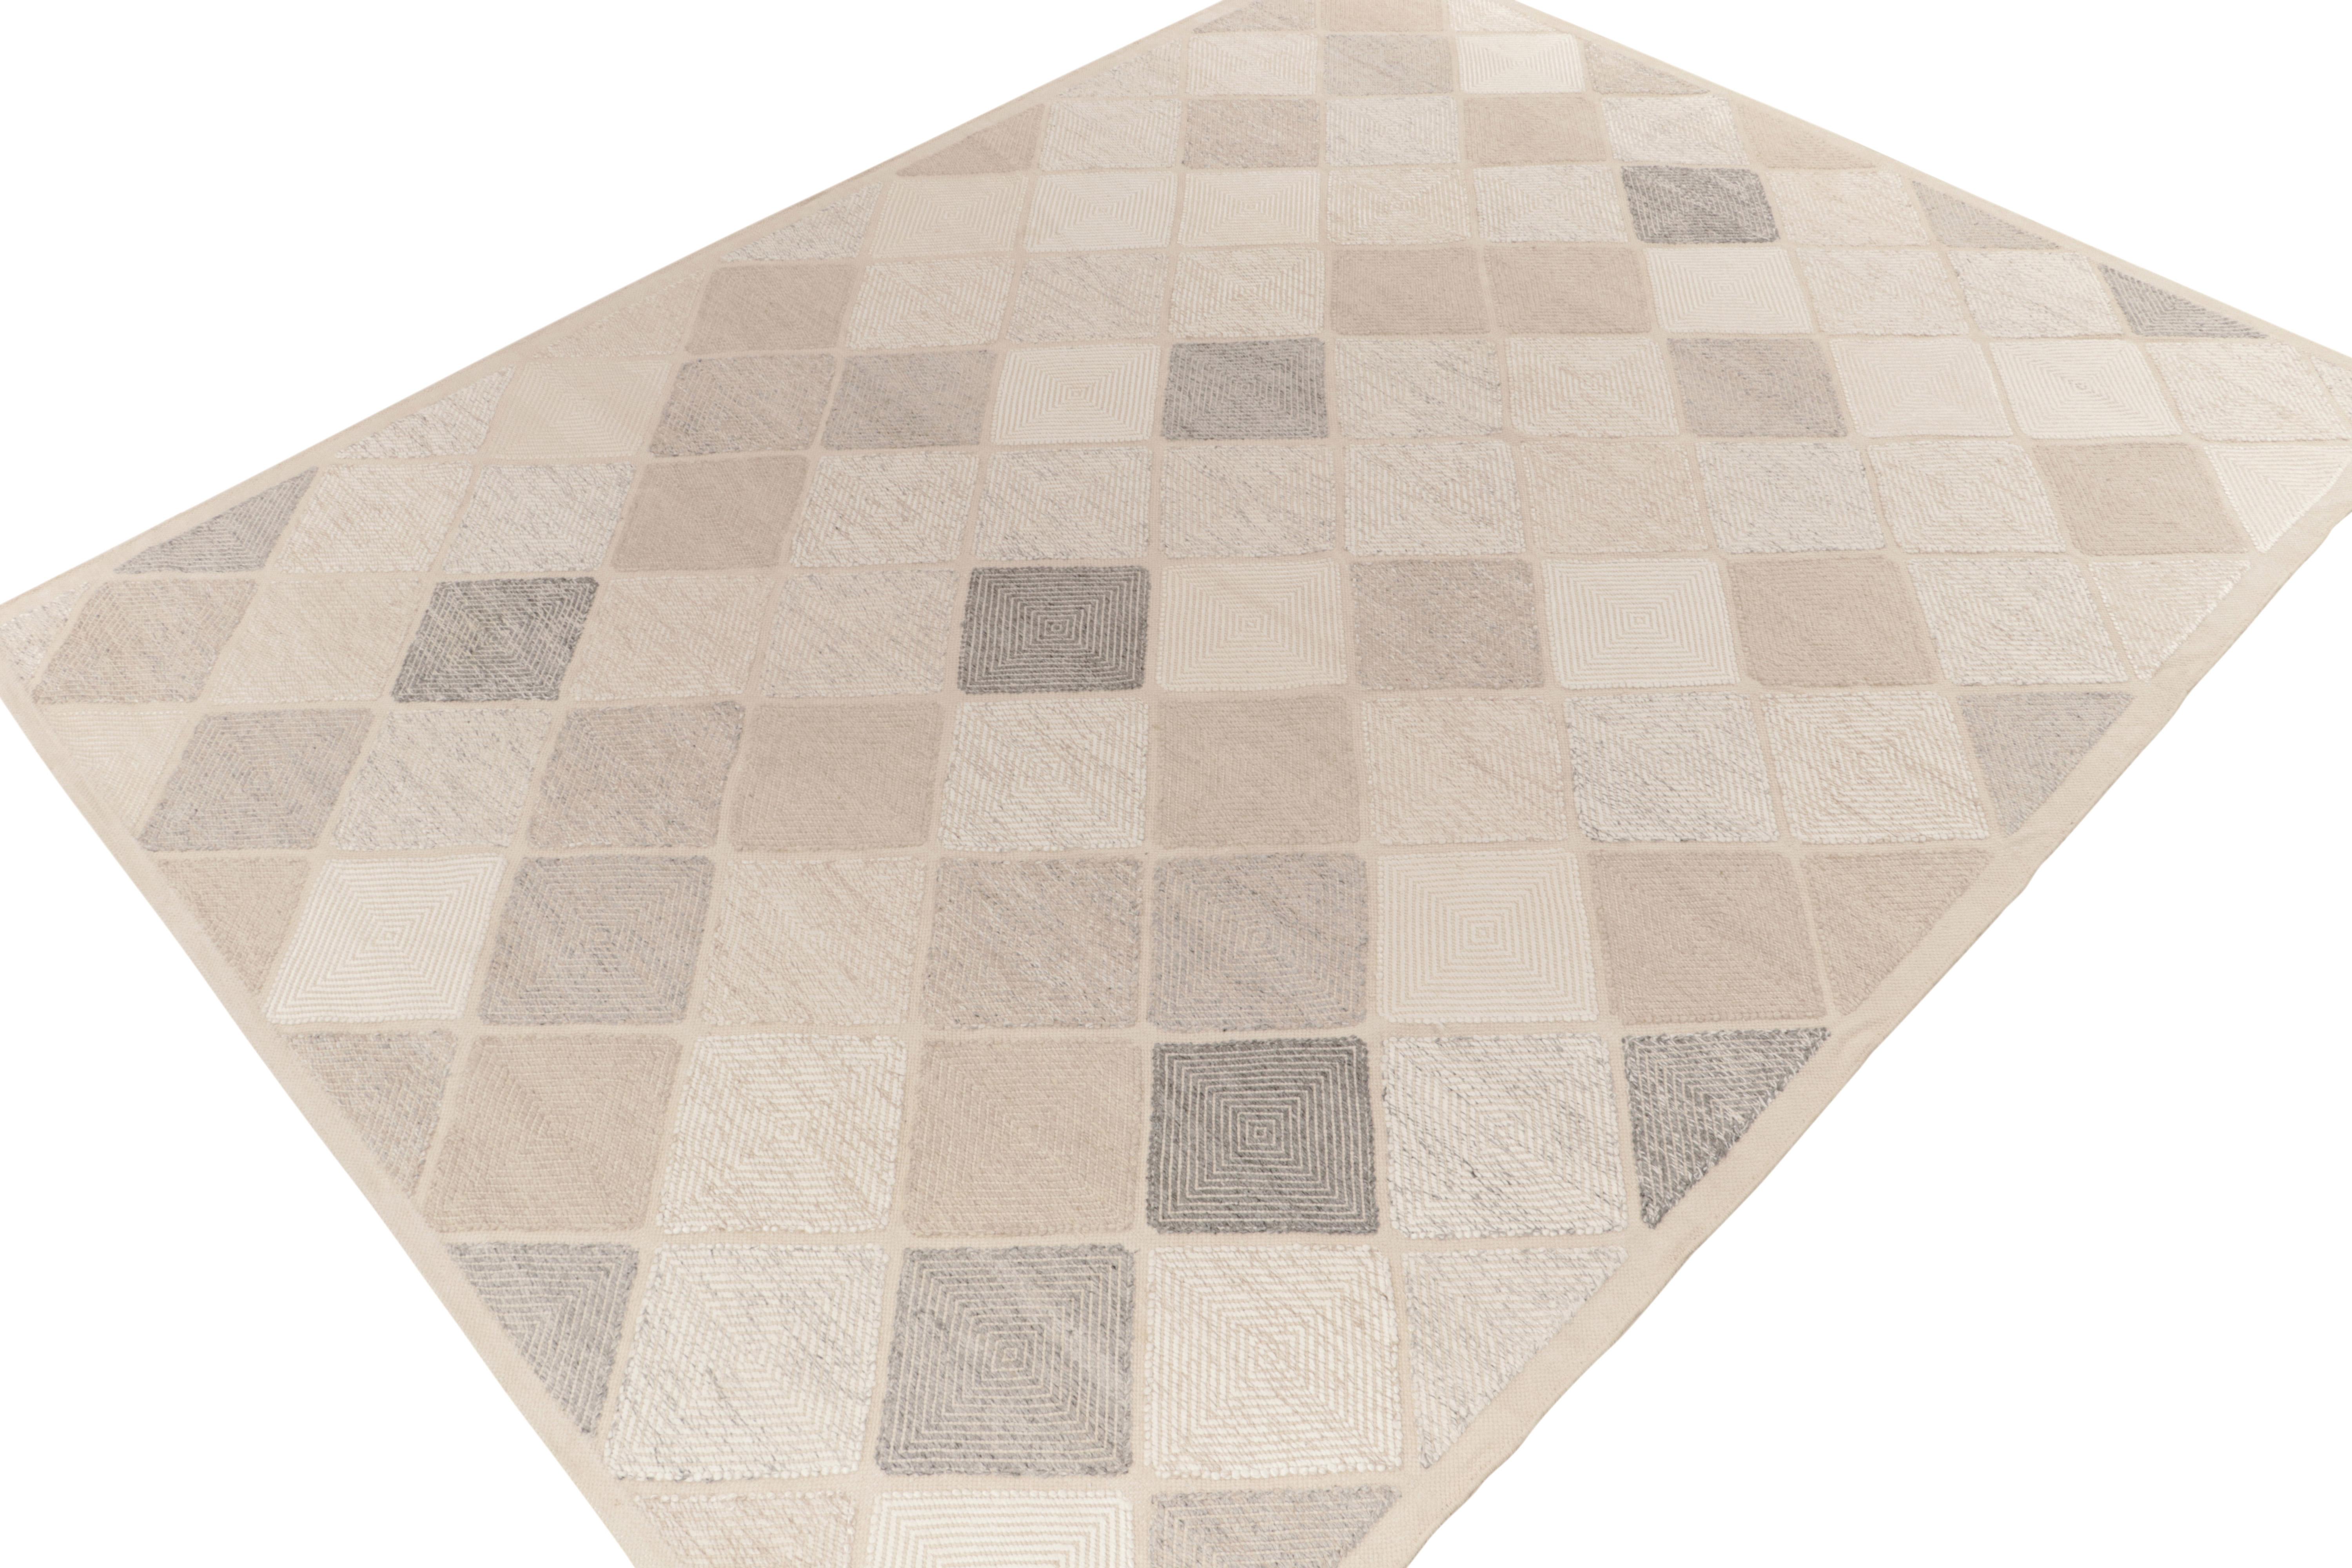 Rug & Kilim presents this exquisite 8x10 Scandinavian kilim from the Morocco line of the award-winning flat weave texture. The handwoven piece flows in an all over half diamond pattern in a delightful blend of beige, stone blue, grey & white. The